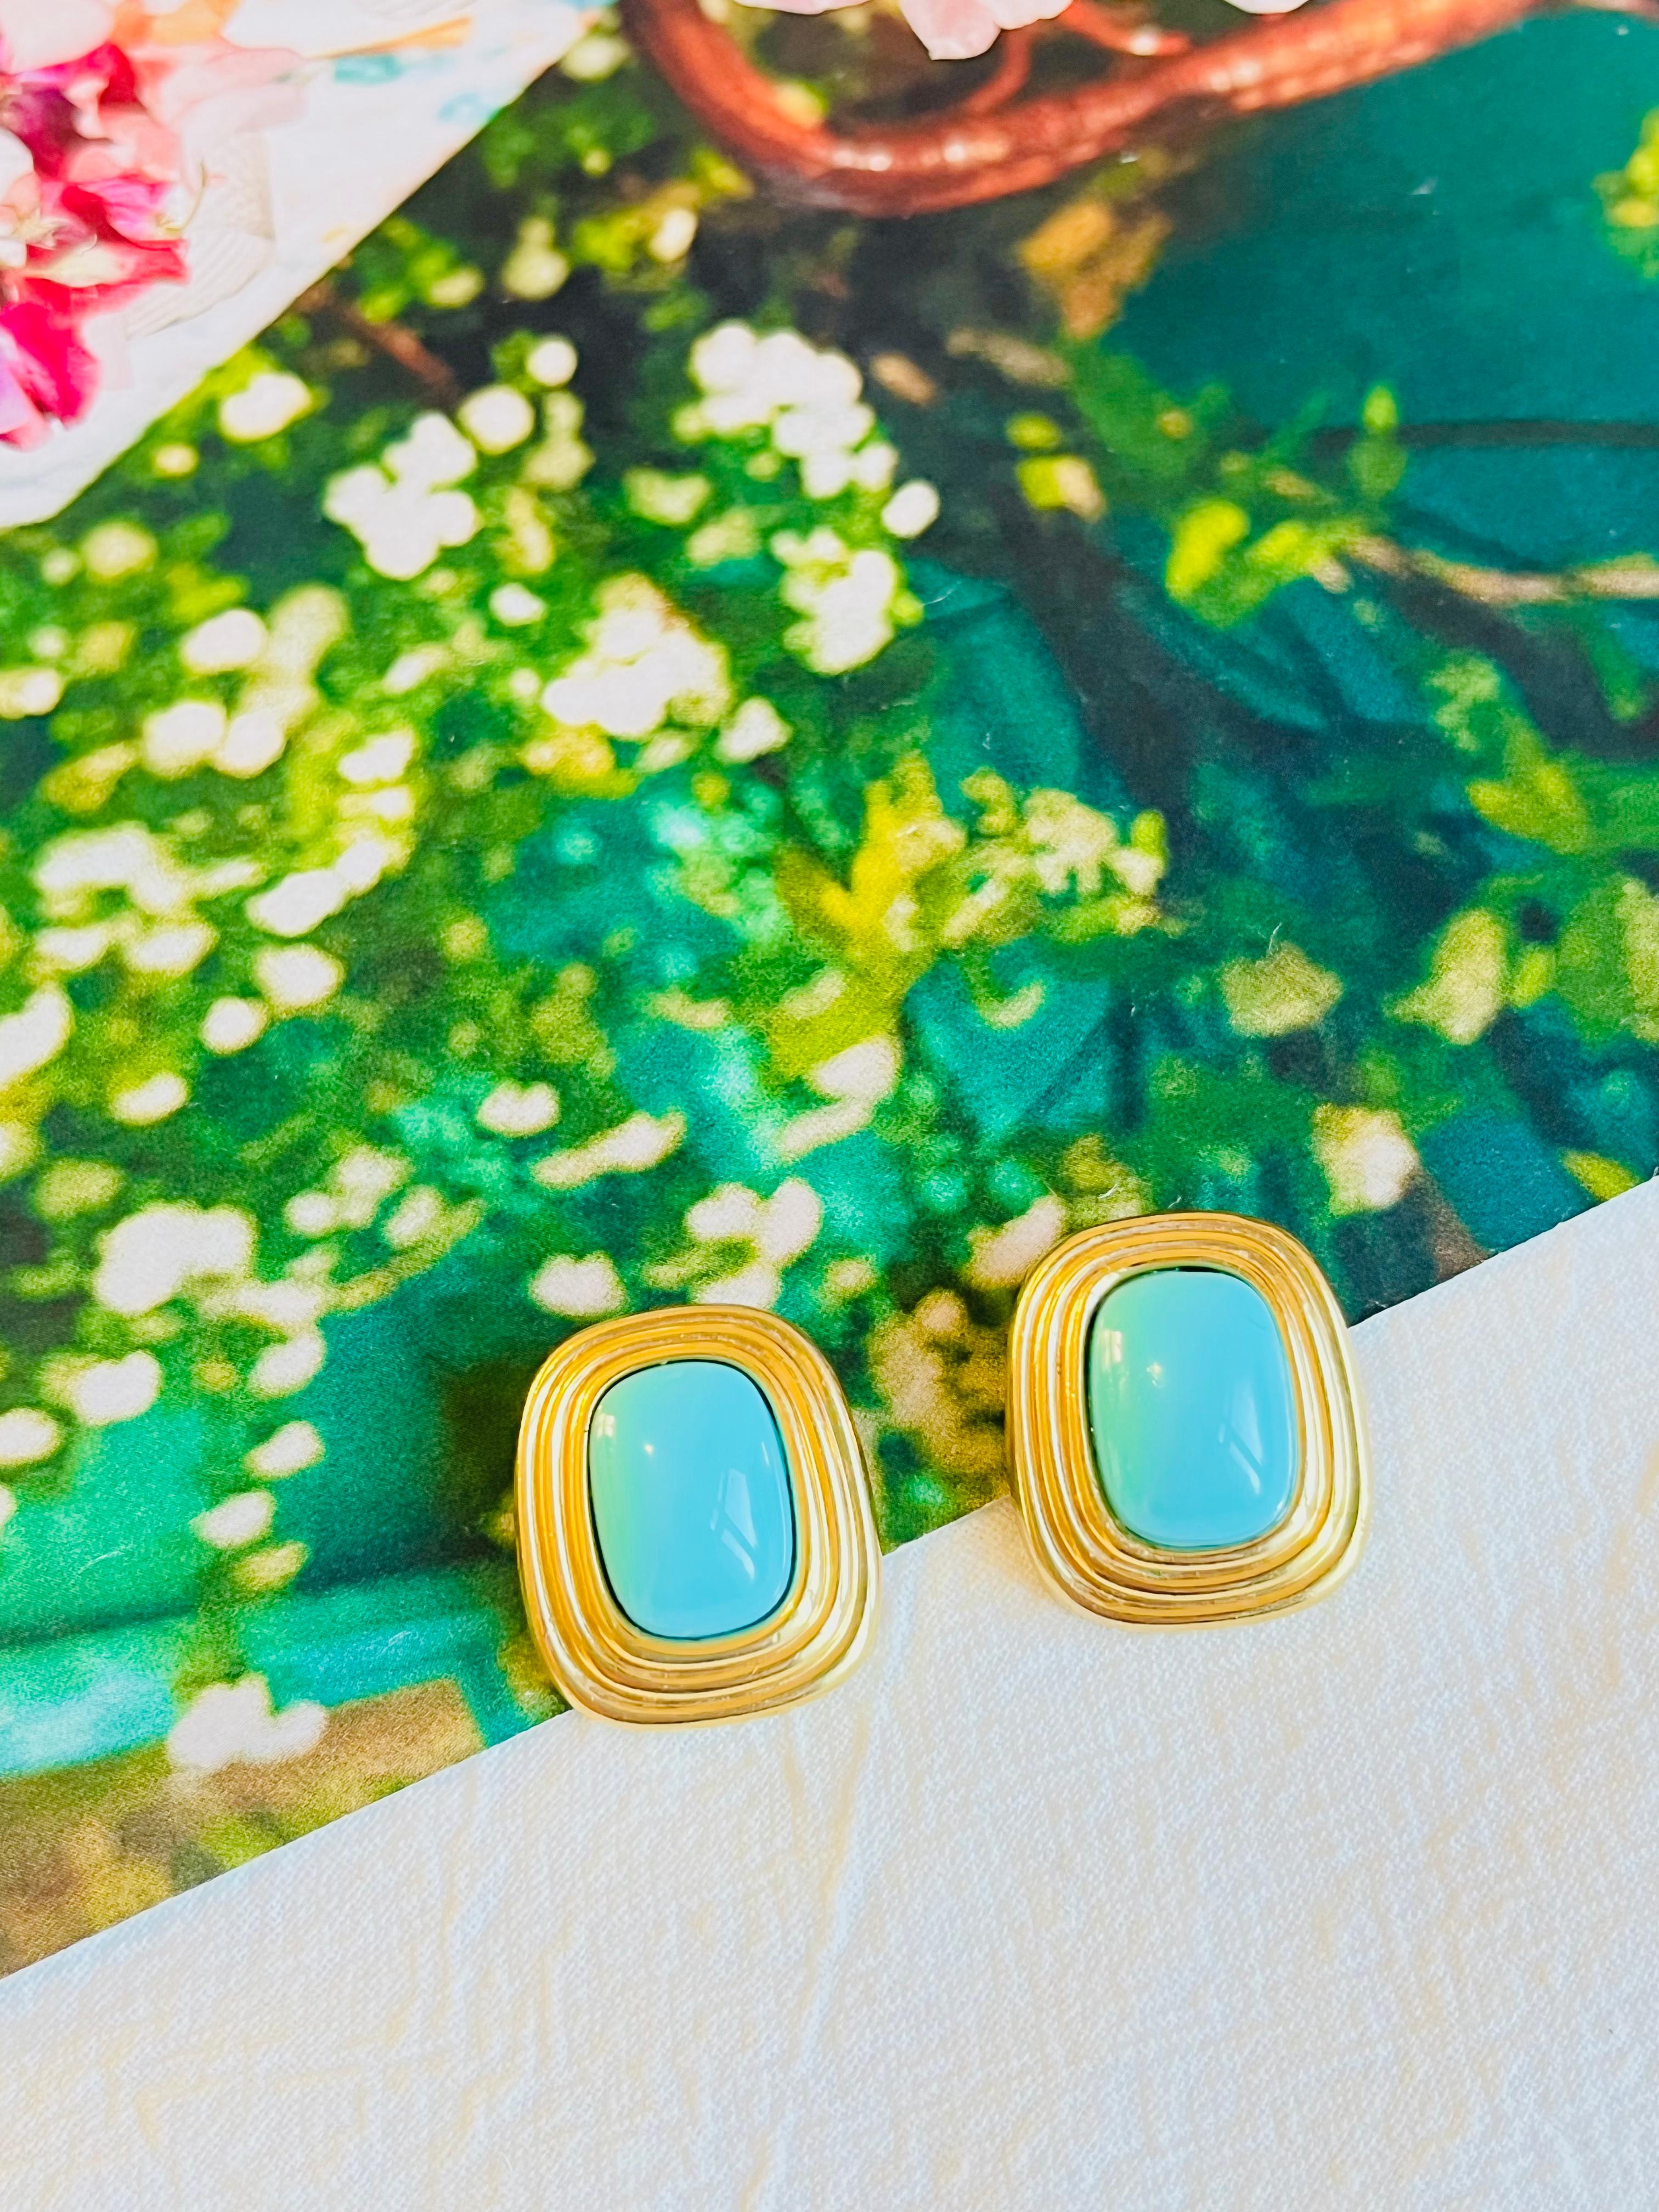 Very excellent condition. Vintage and rare to find. 100% Genuine.

A very beautiful pair of clip on earrings by Chr. DIOR, signed at the back.

Size: 2.3*2.0 cm.

Weight: 7.0 g/each.

_ _ _

Great for everyday wear. Come with velvet pouch and